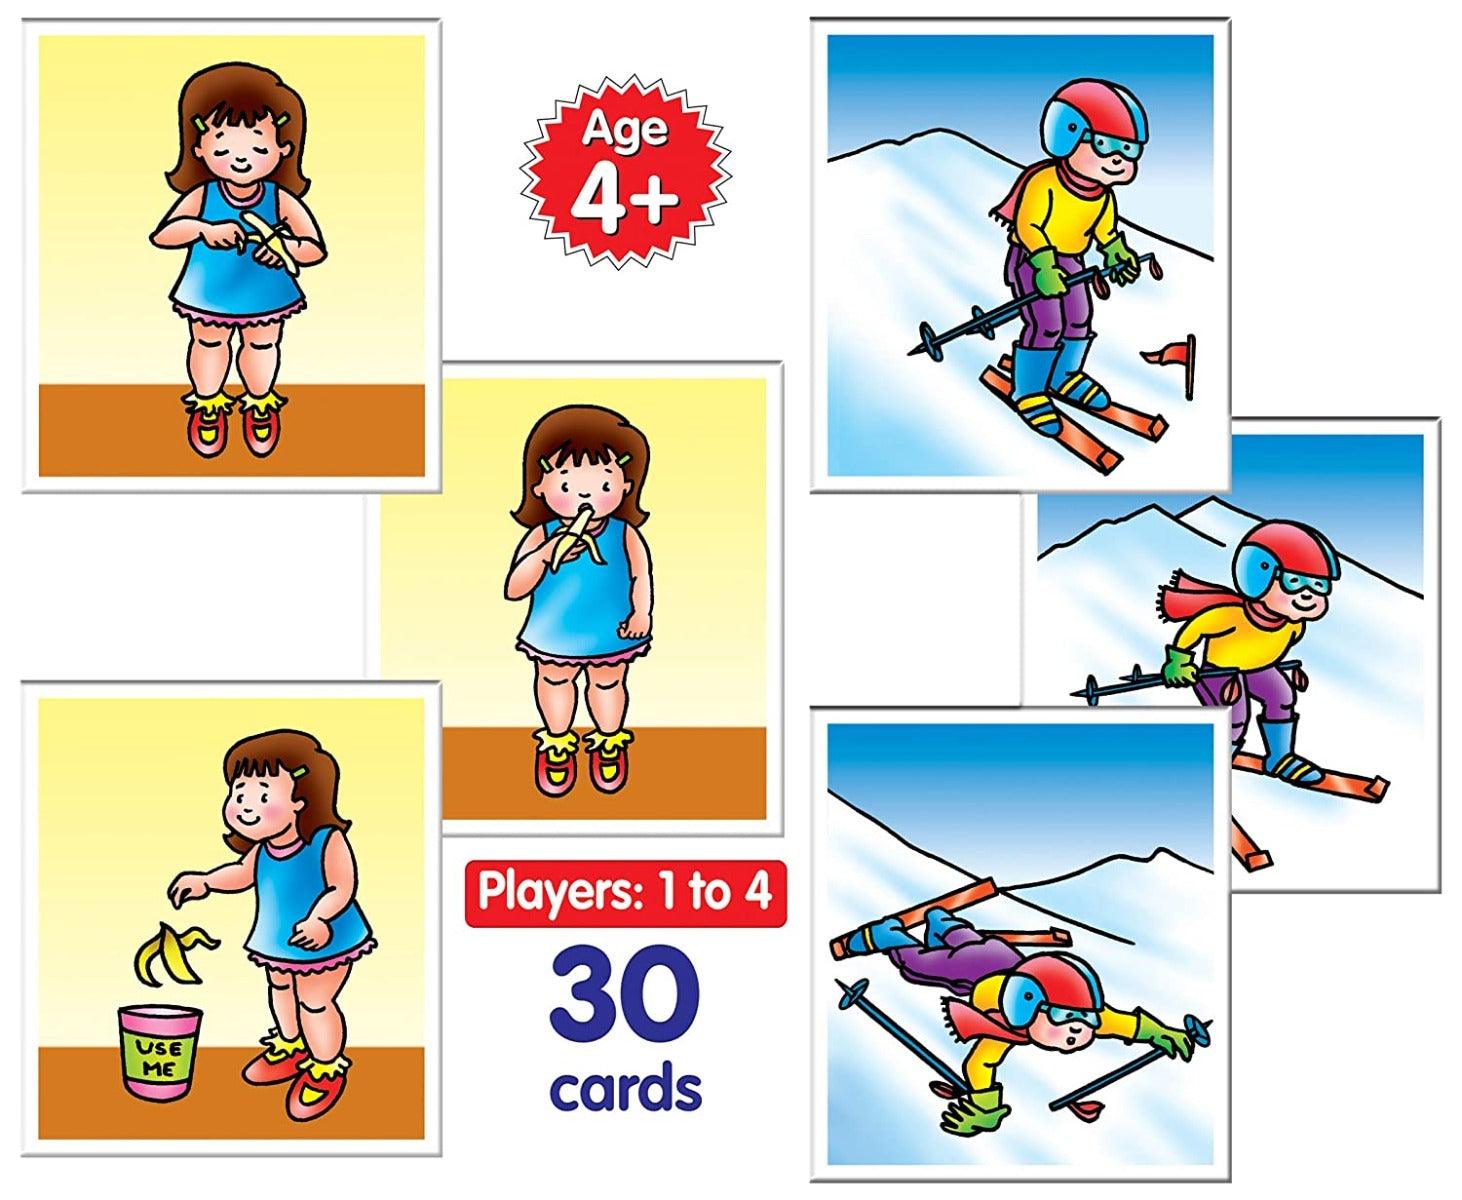 Frank What Comes Next Game ‚Äö√Ñ√¨ 30 Picture Cards, 10 Sets, Early Learner Matching Picture Card Game with Images